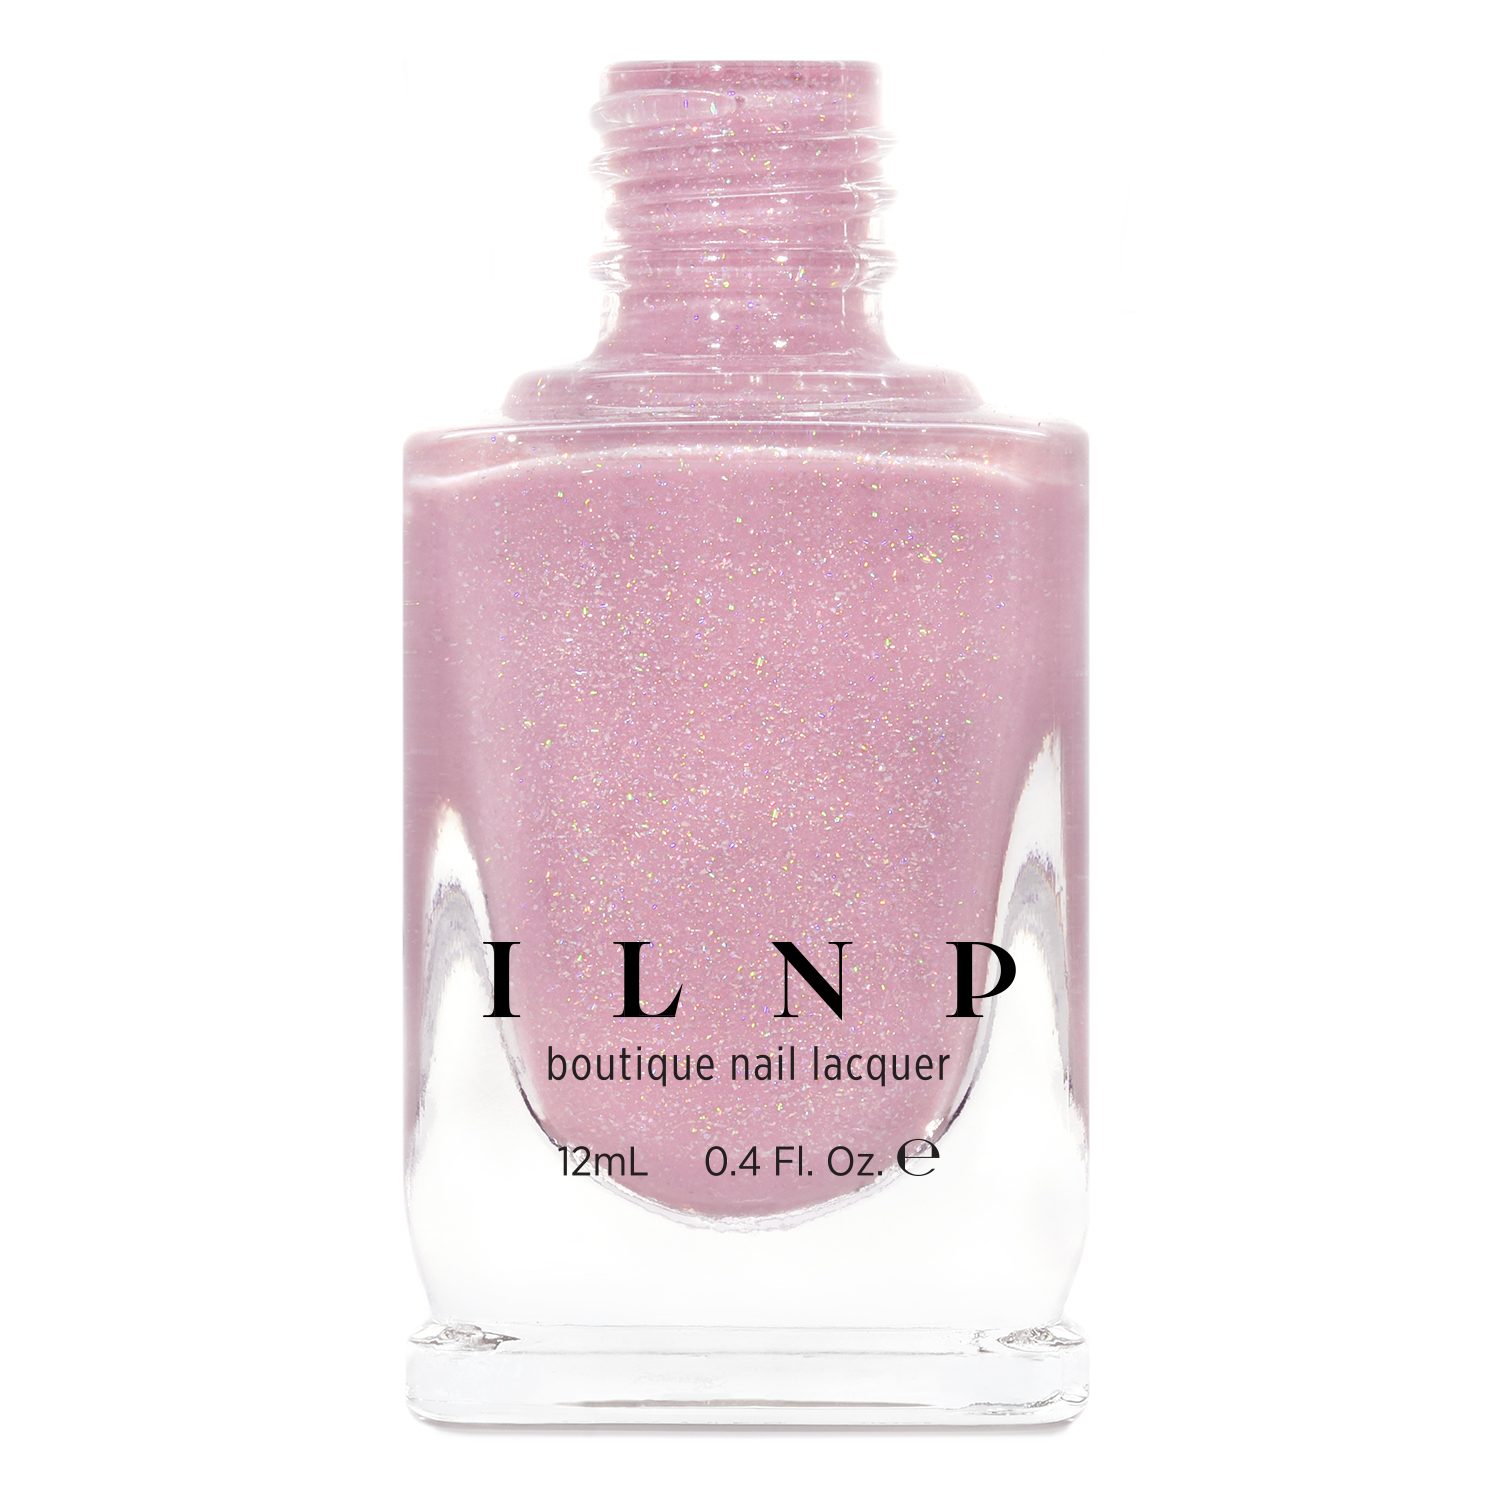 Sweet Pea - Seashell Pink Holographic Sheer Jelly Nail Polish by ILNP